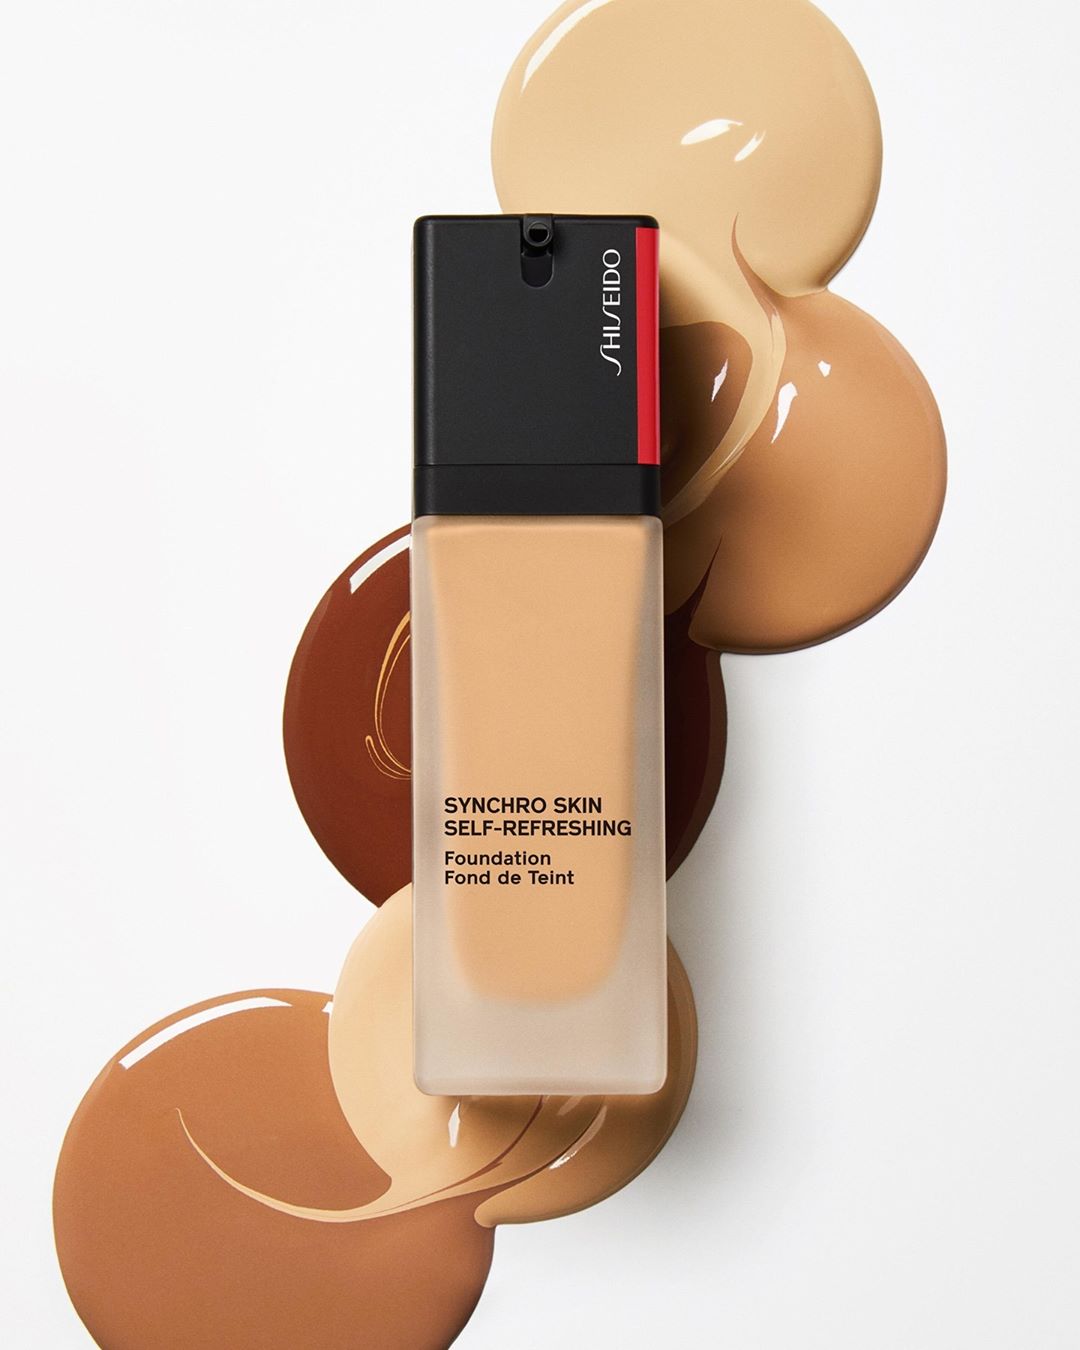 SHISEIDO - Discover a foundation that’s finally on your level. Use @sephora’s Shade Finder to reveal the Synchro Skin Self-Refreshing Foundation that’s right for you. Choose from five categories class...